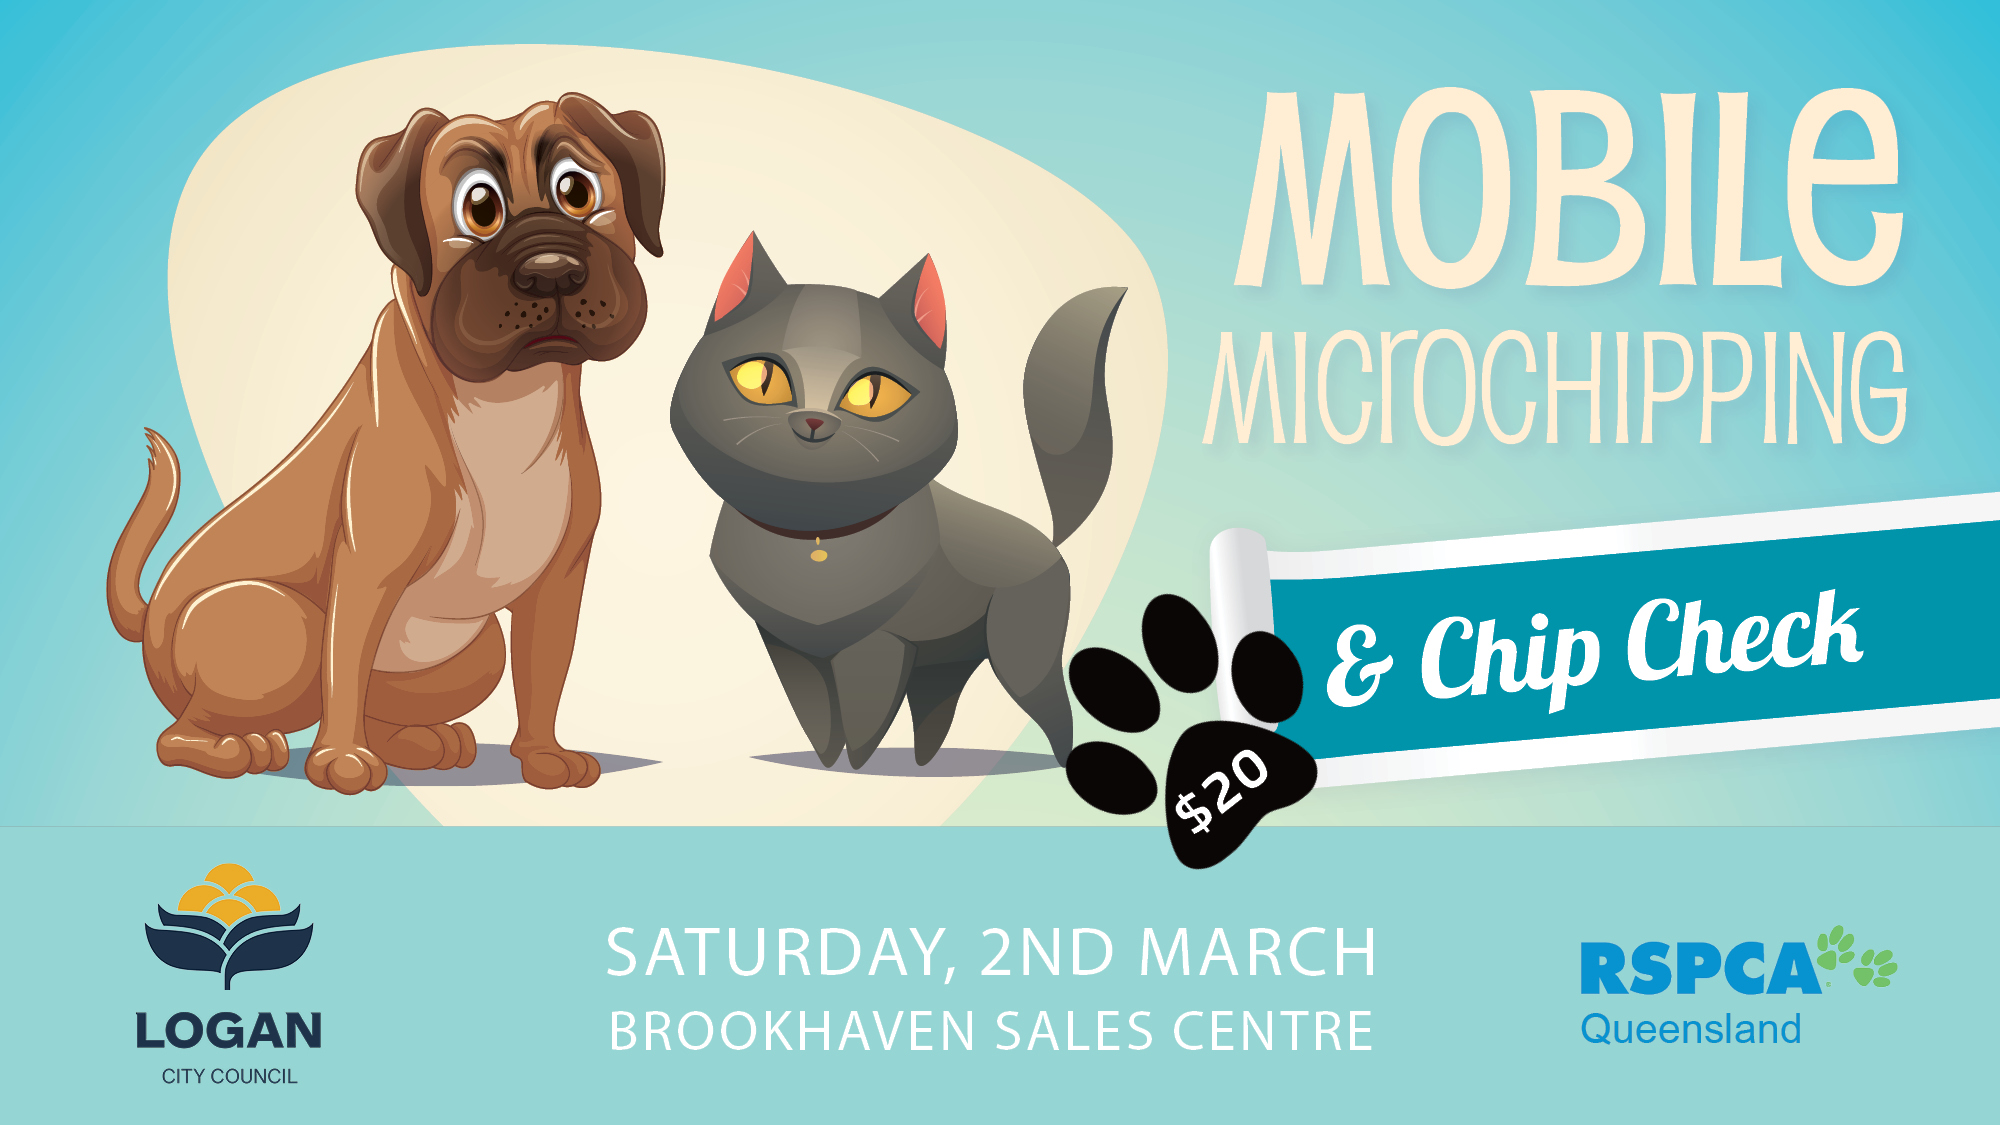 Discounted Microchipping at Brookhaven Sales Centre - $20 